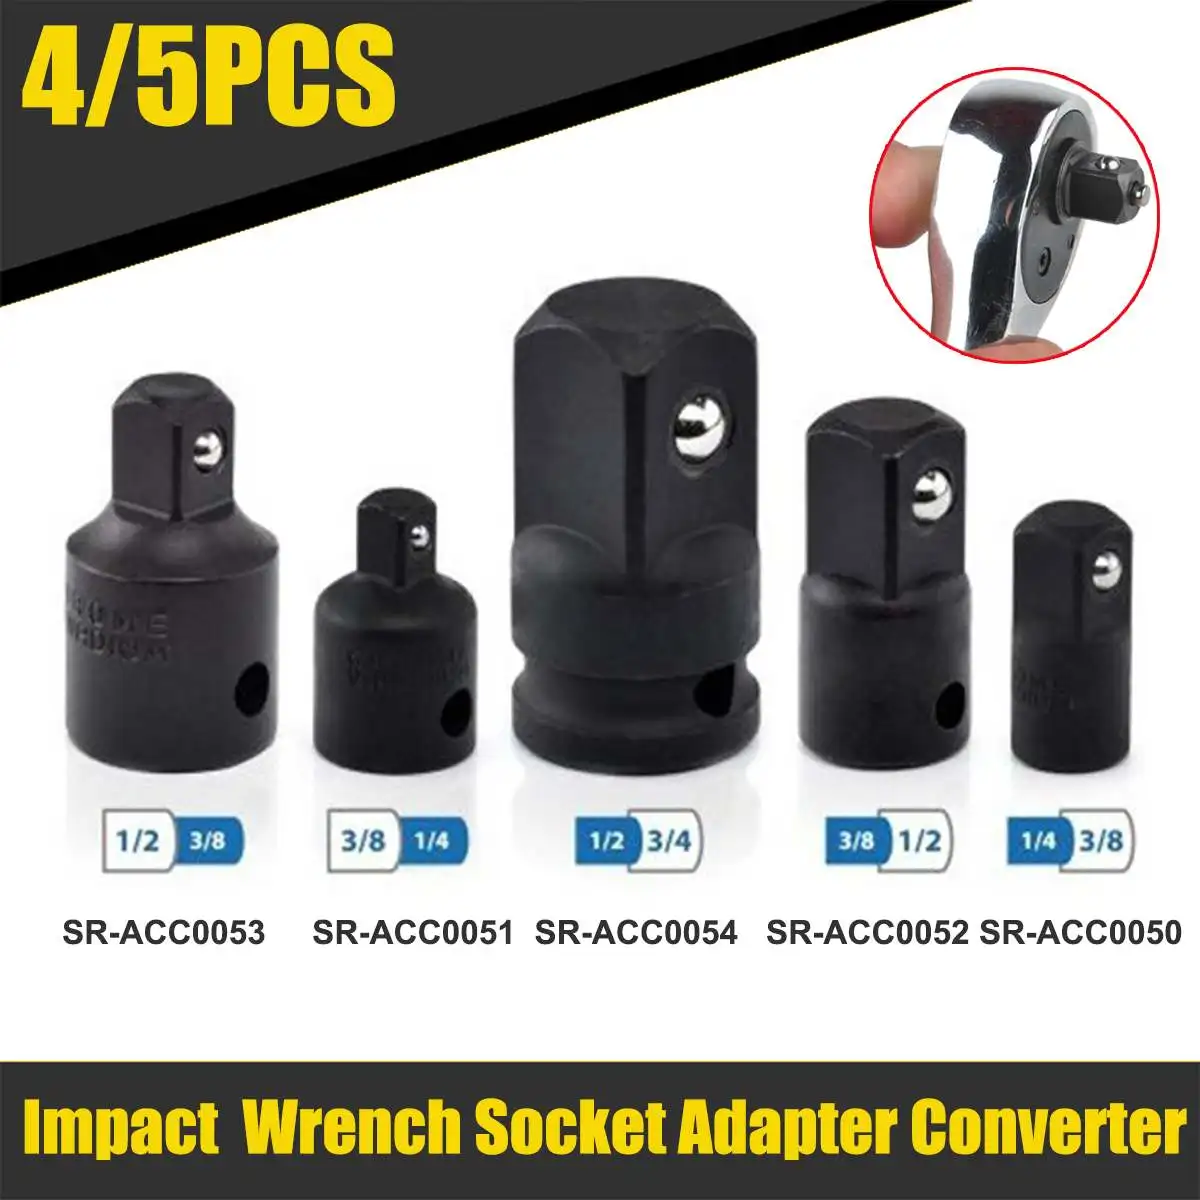 3/4 to 1/2" 1/2 to 3/4" 3 Piece Impact Wrench Socket Adapter Set 1/2 to 3/8"